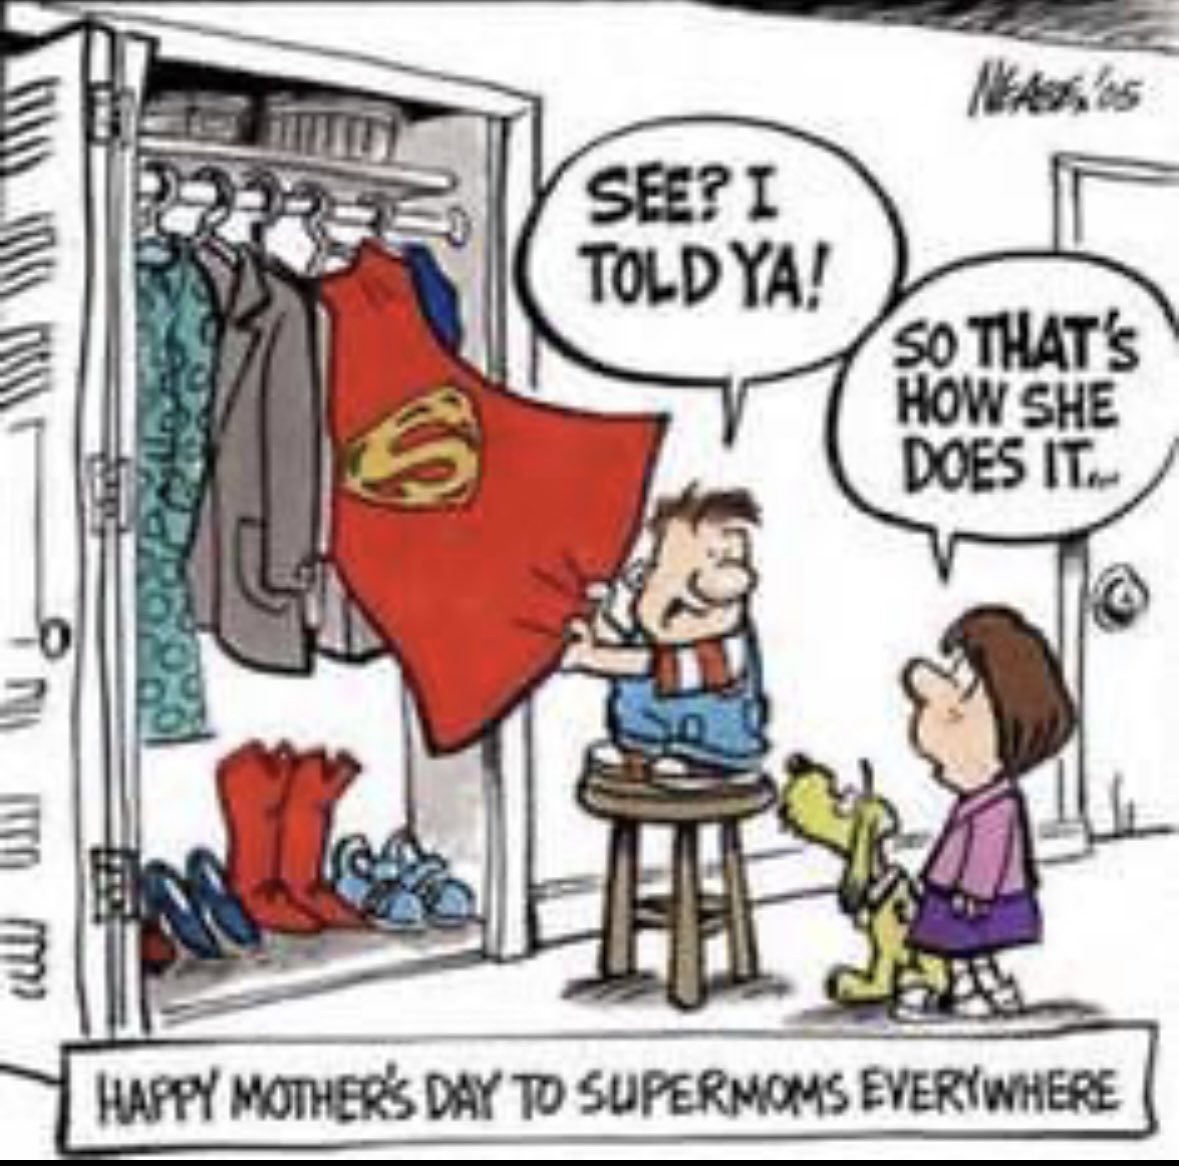 Happy Mother’s Day ! #mothersday #supermom